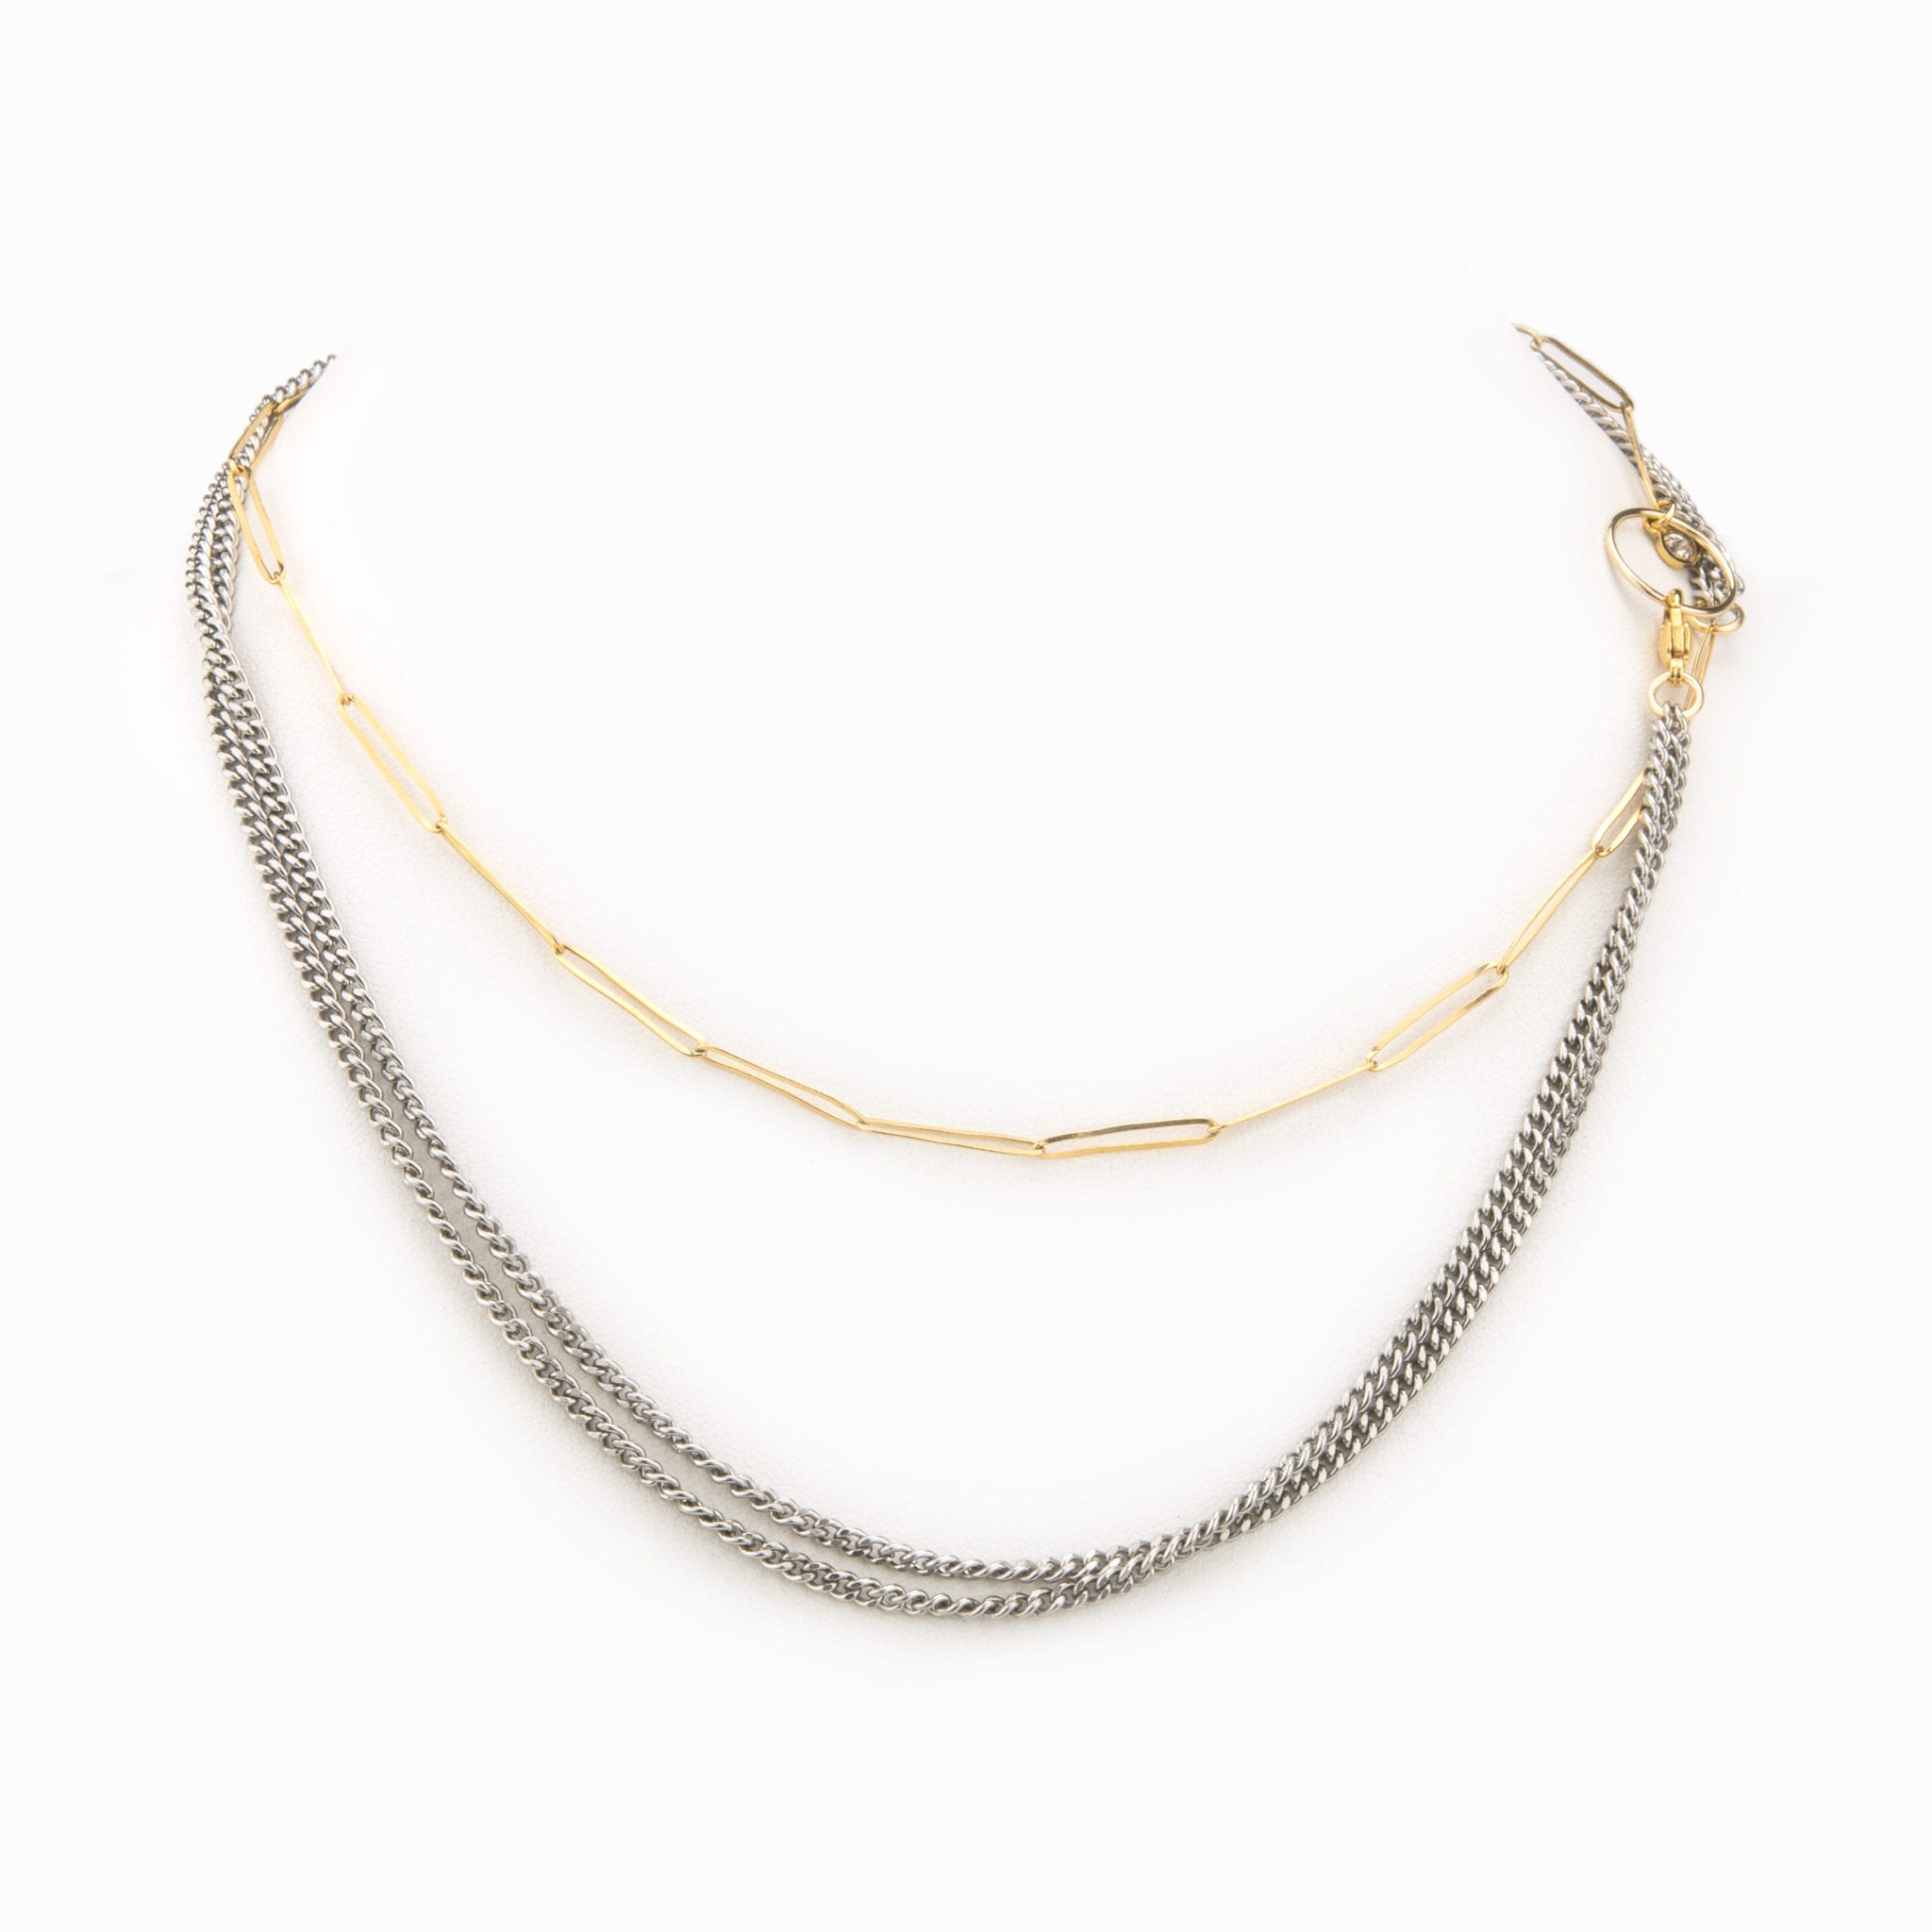 Featured image for “Staple Mixed Metal Necklace”